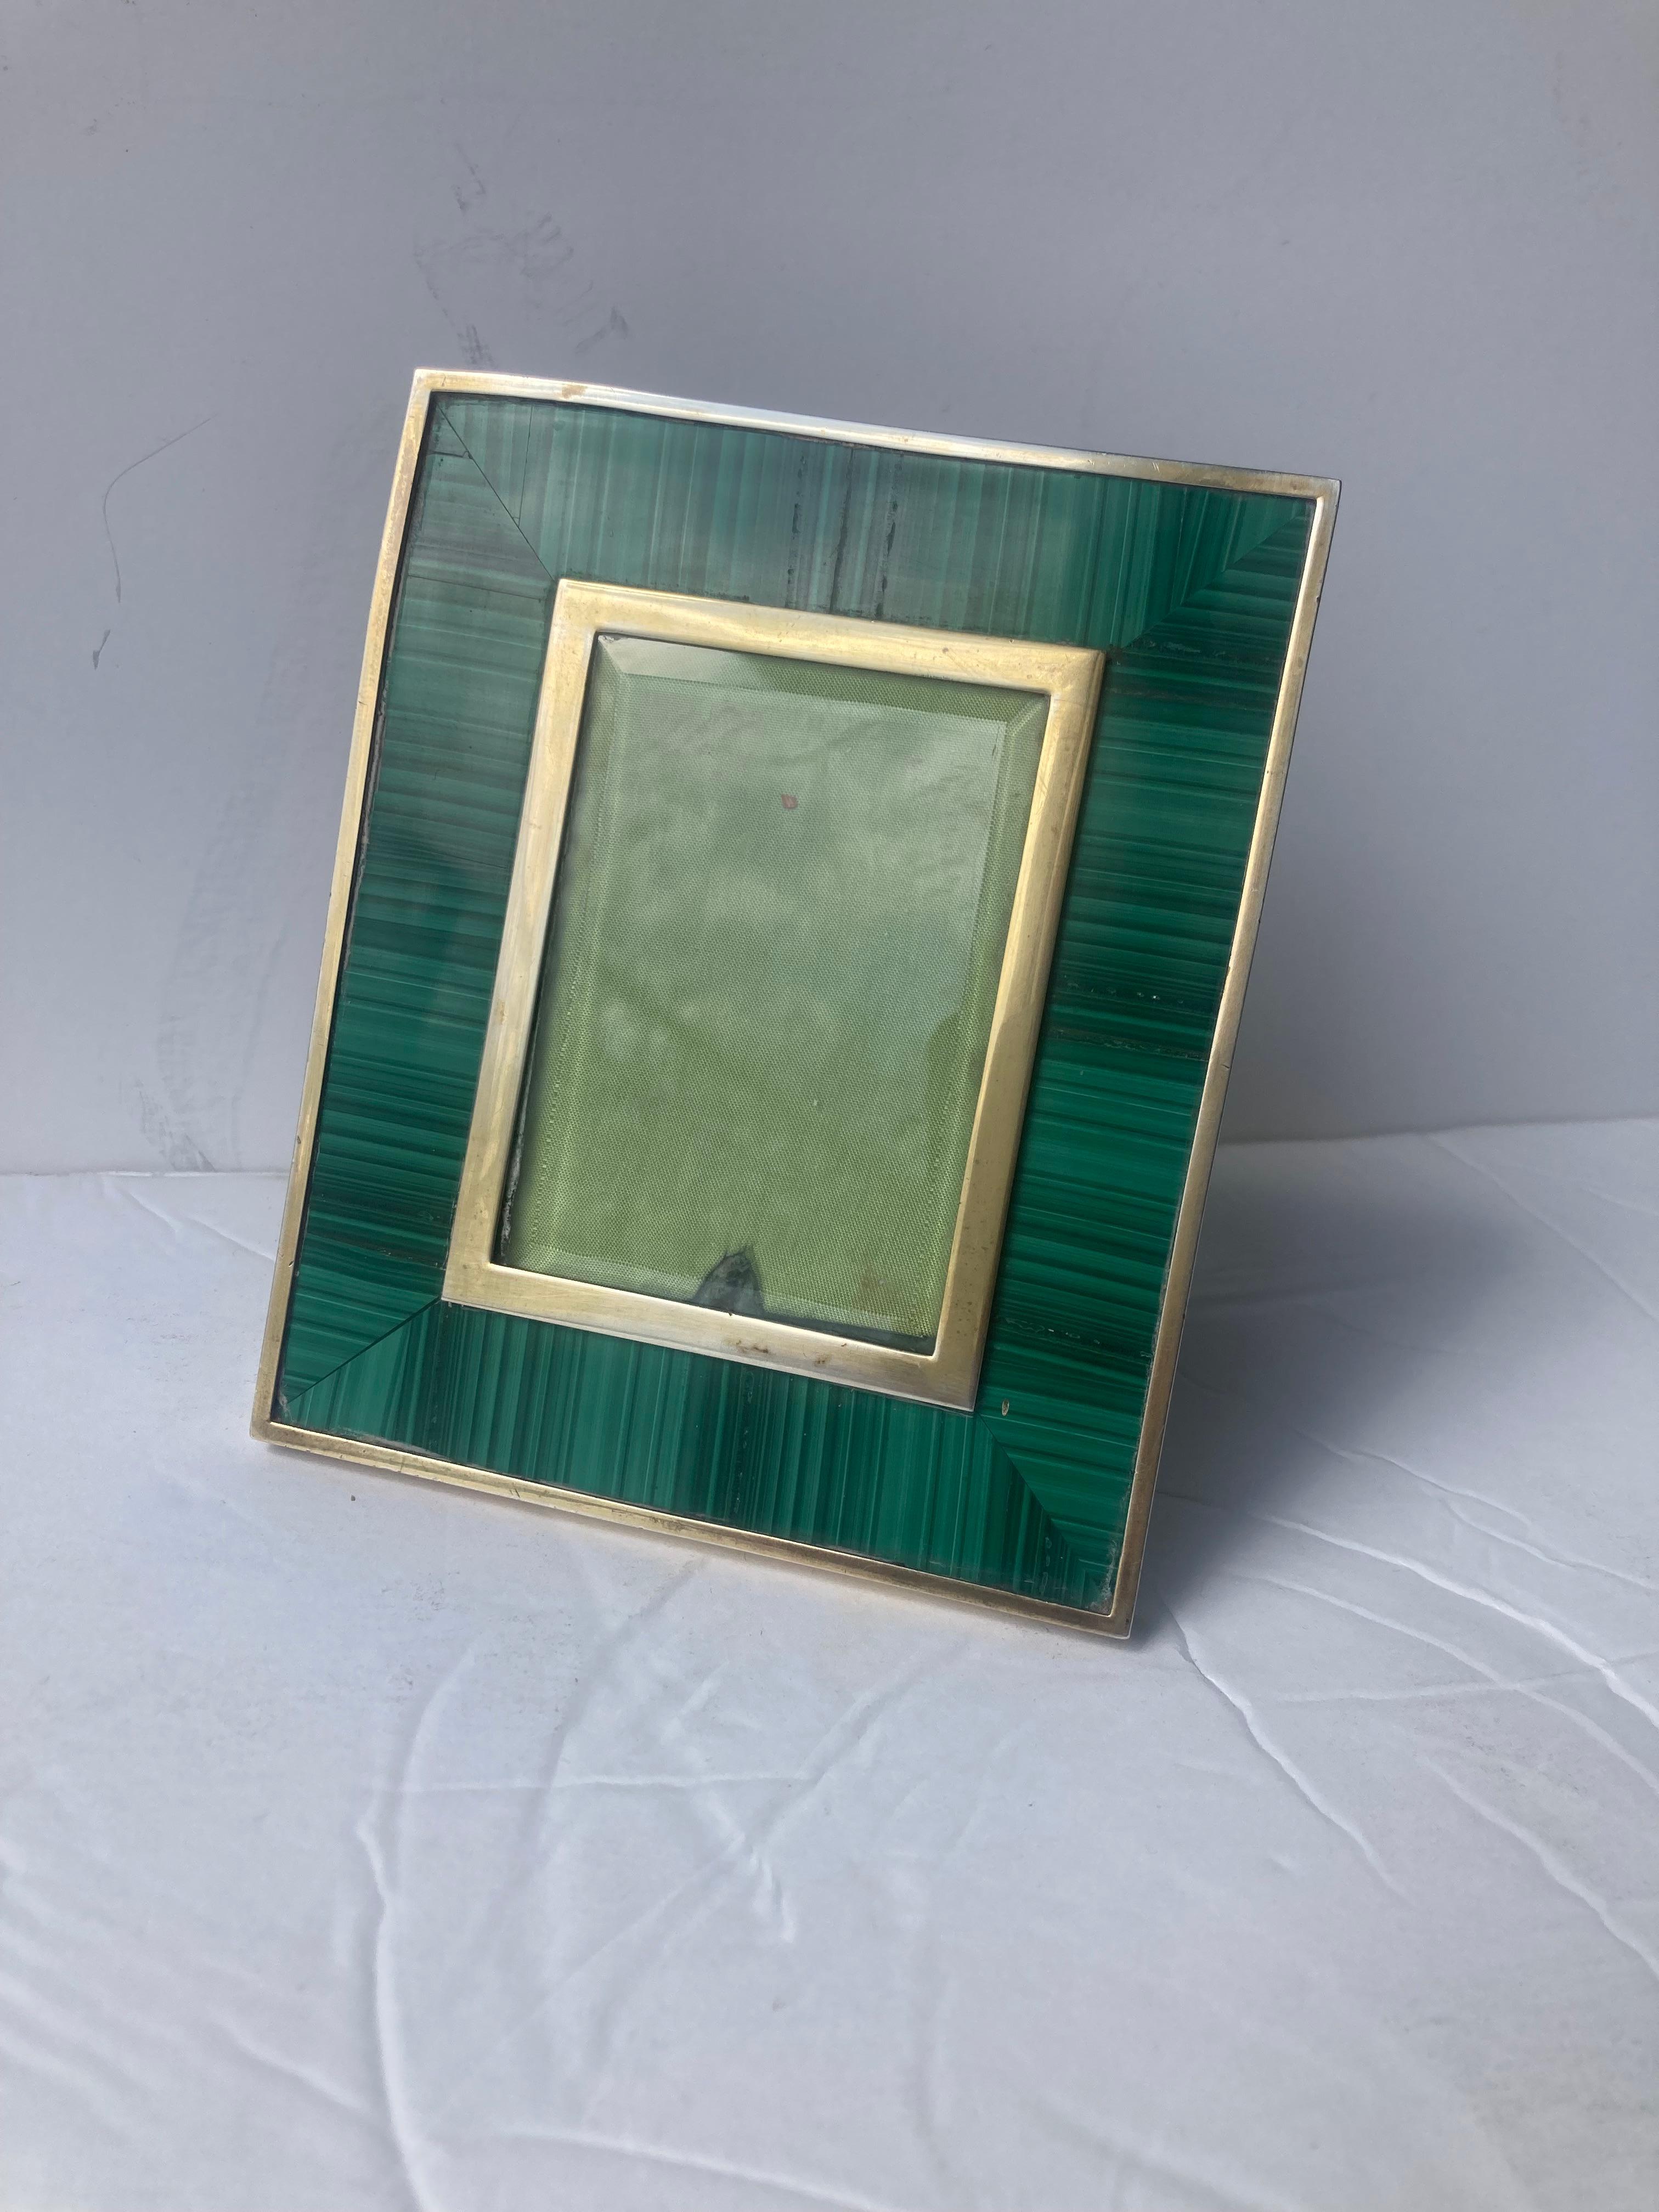 Beautiful luxury picture frame in malachite and gold wash sterling silver. The picture window measure  3x2 inches. Marked in bottom as shown ,Made in Italy and (star) 391 FI , as Firenze and designers mark and .925, 